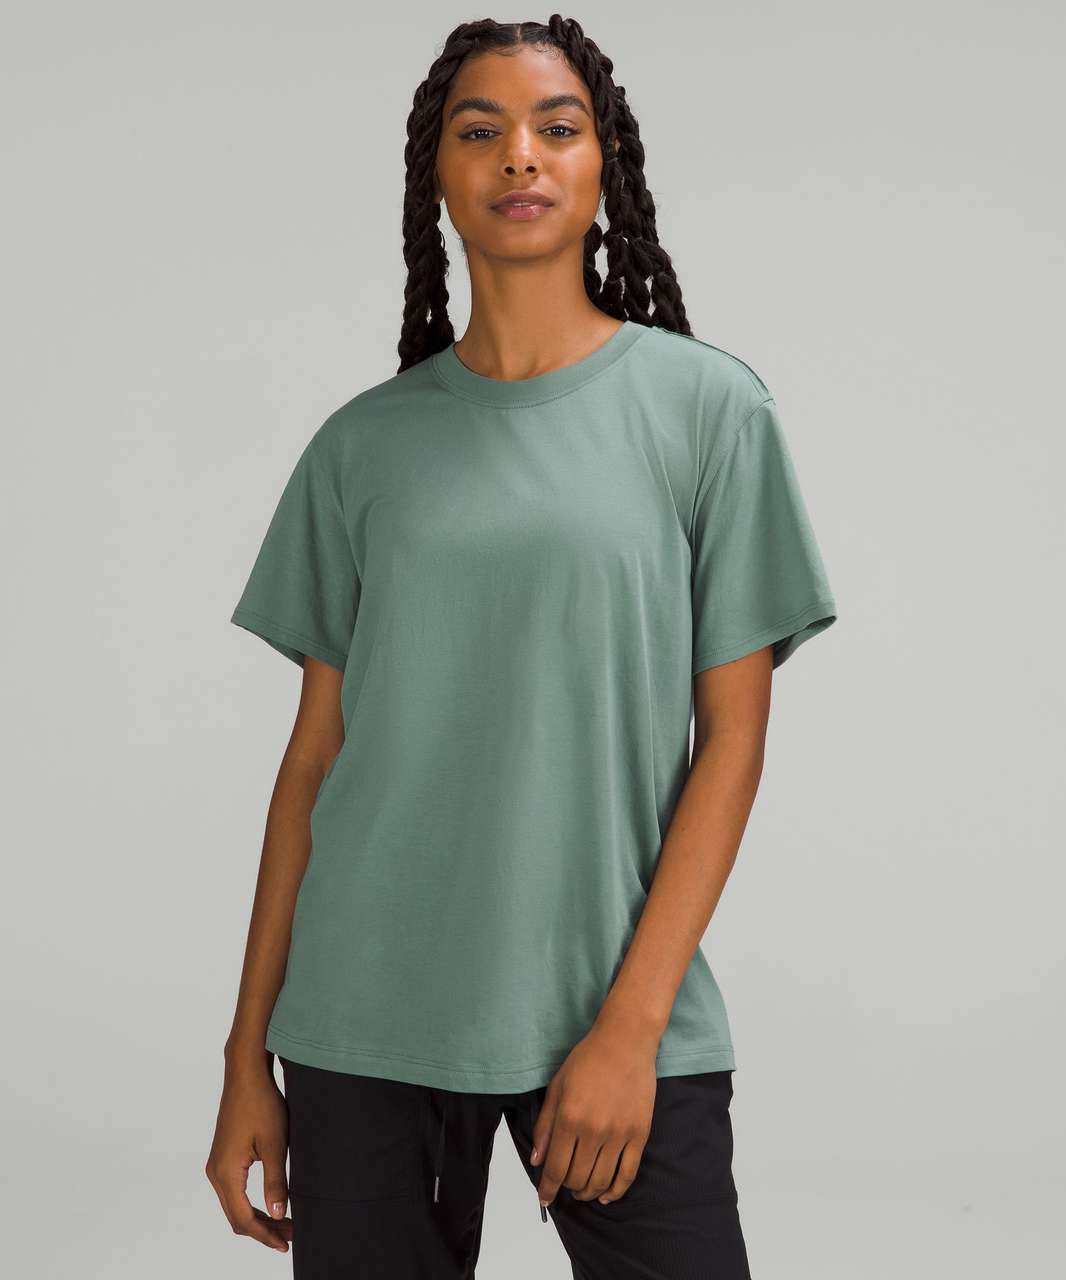 Lululemon All Yours Cotton T-Shirt - Tidewater Teal